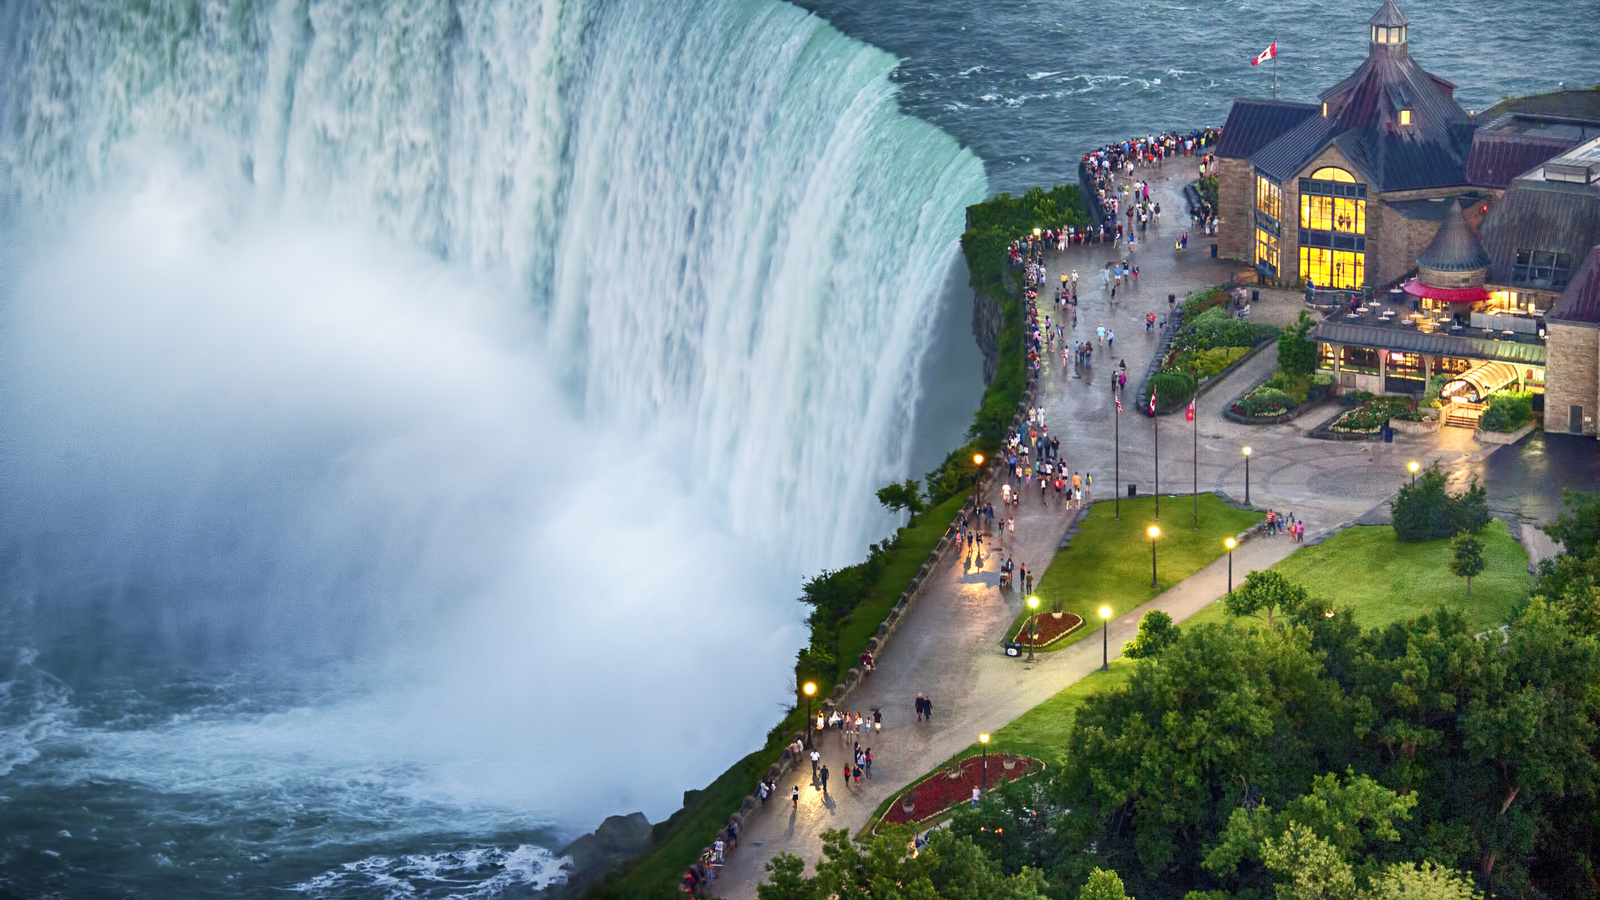 General 1600x900 nature landscape aerial view water trees forest Tourism Niagara Falls waterfall Canada building crowds people USA border Ontario lake vibrant